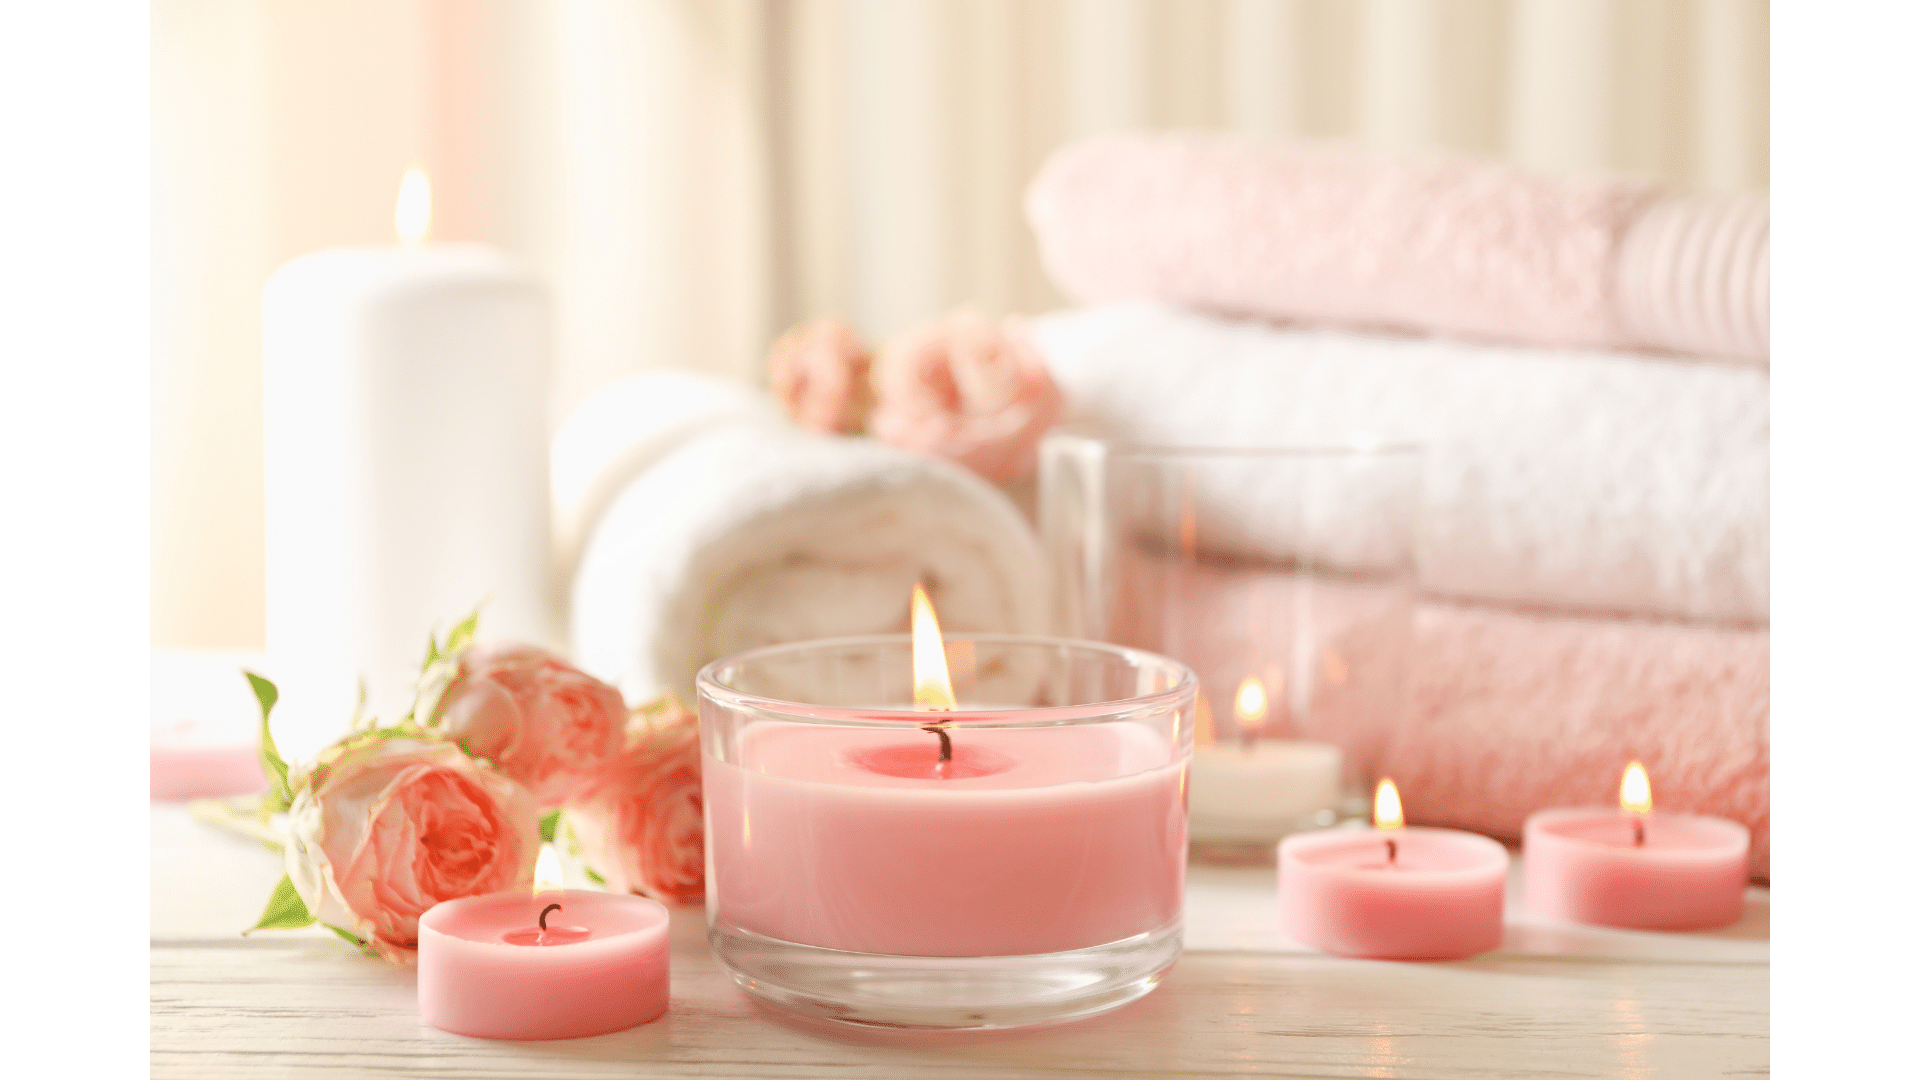 Therapeutic candle aromas: Lit candles with pink wax, creating a relaxing ambience.